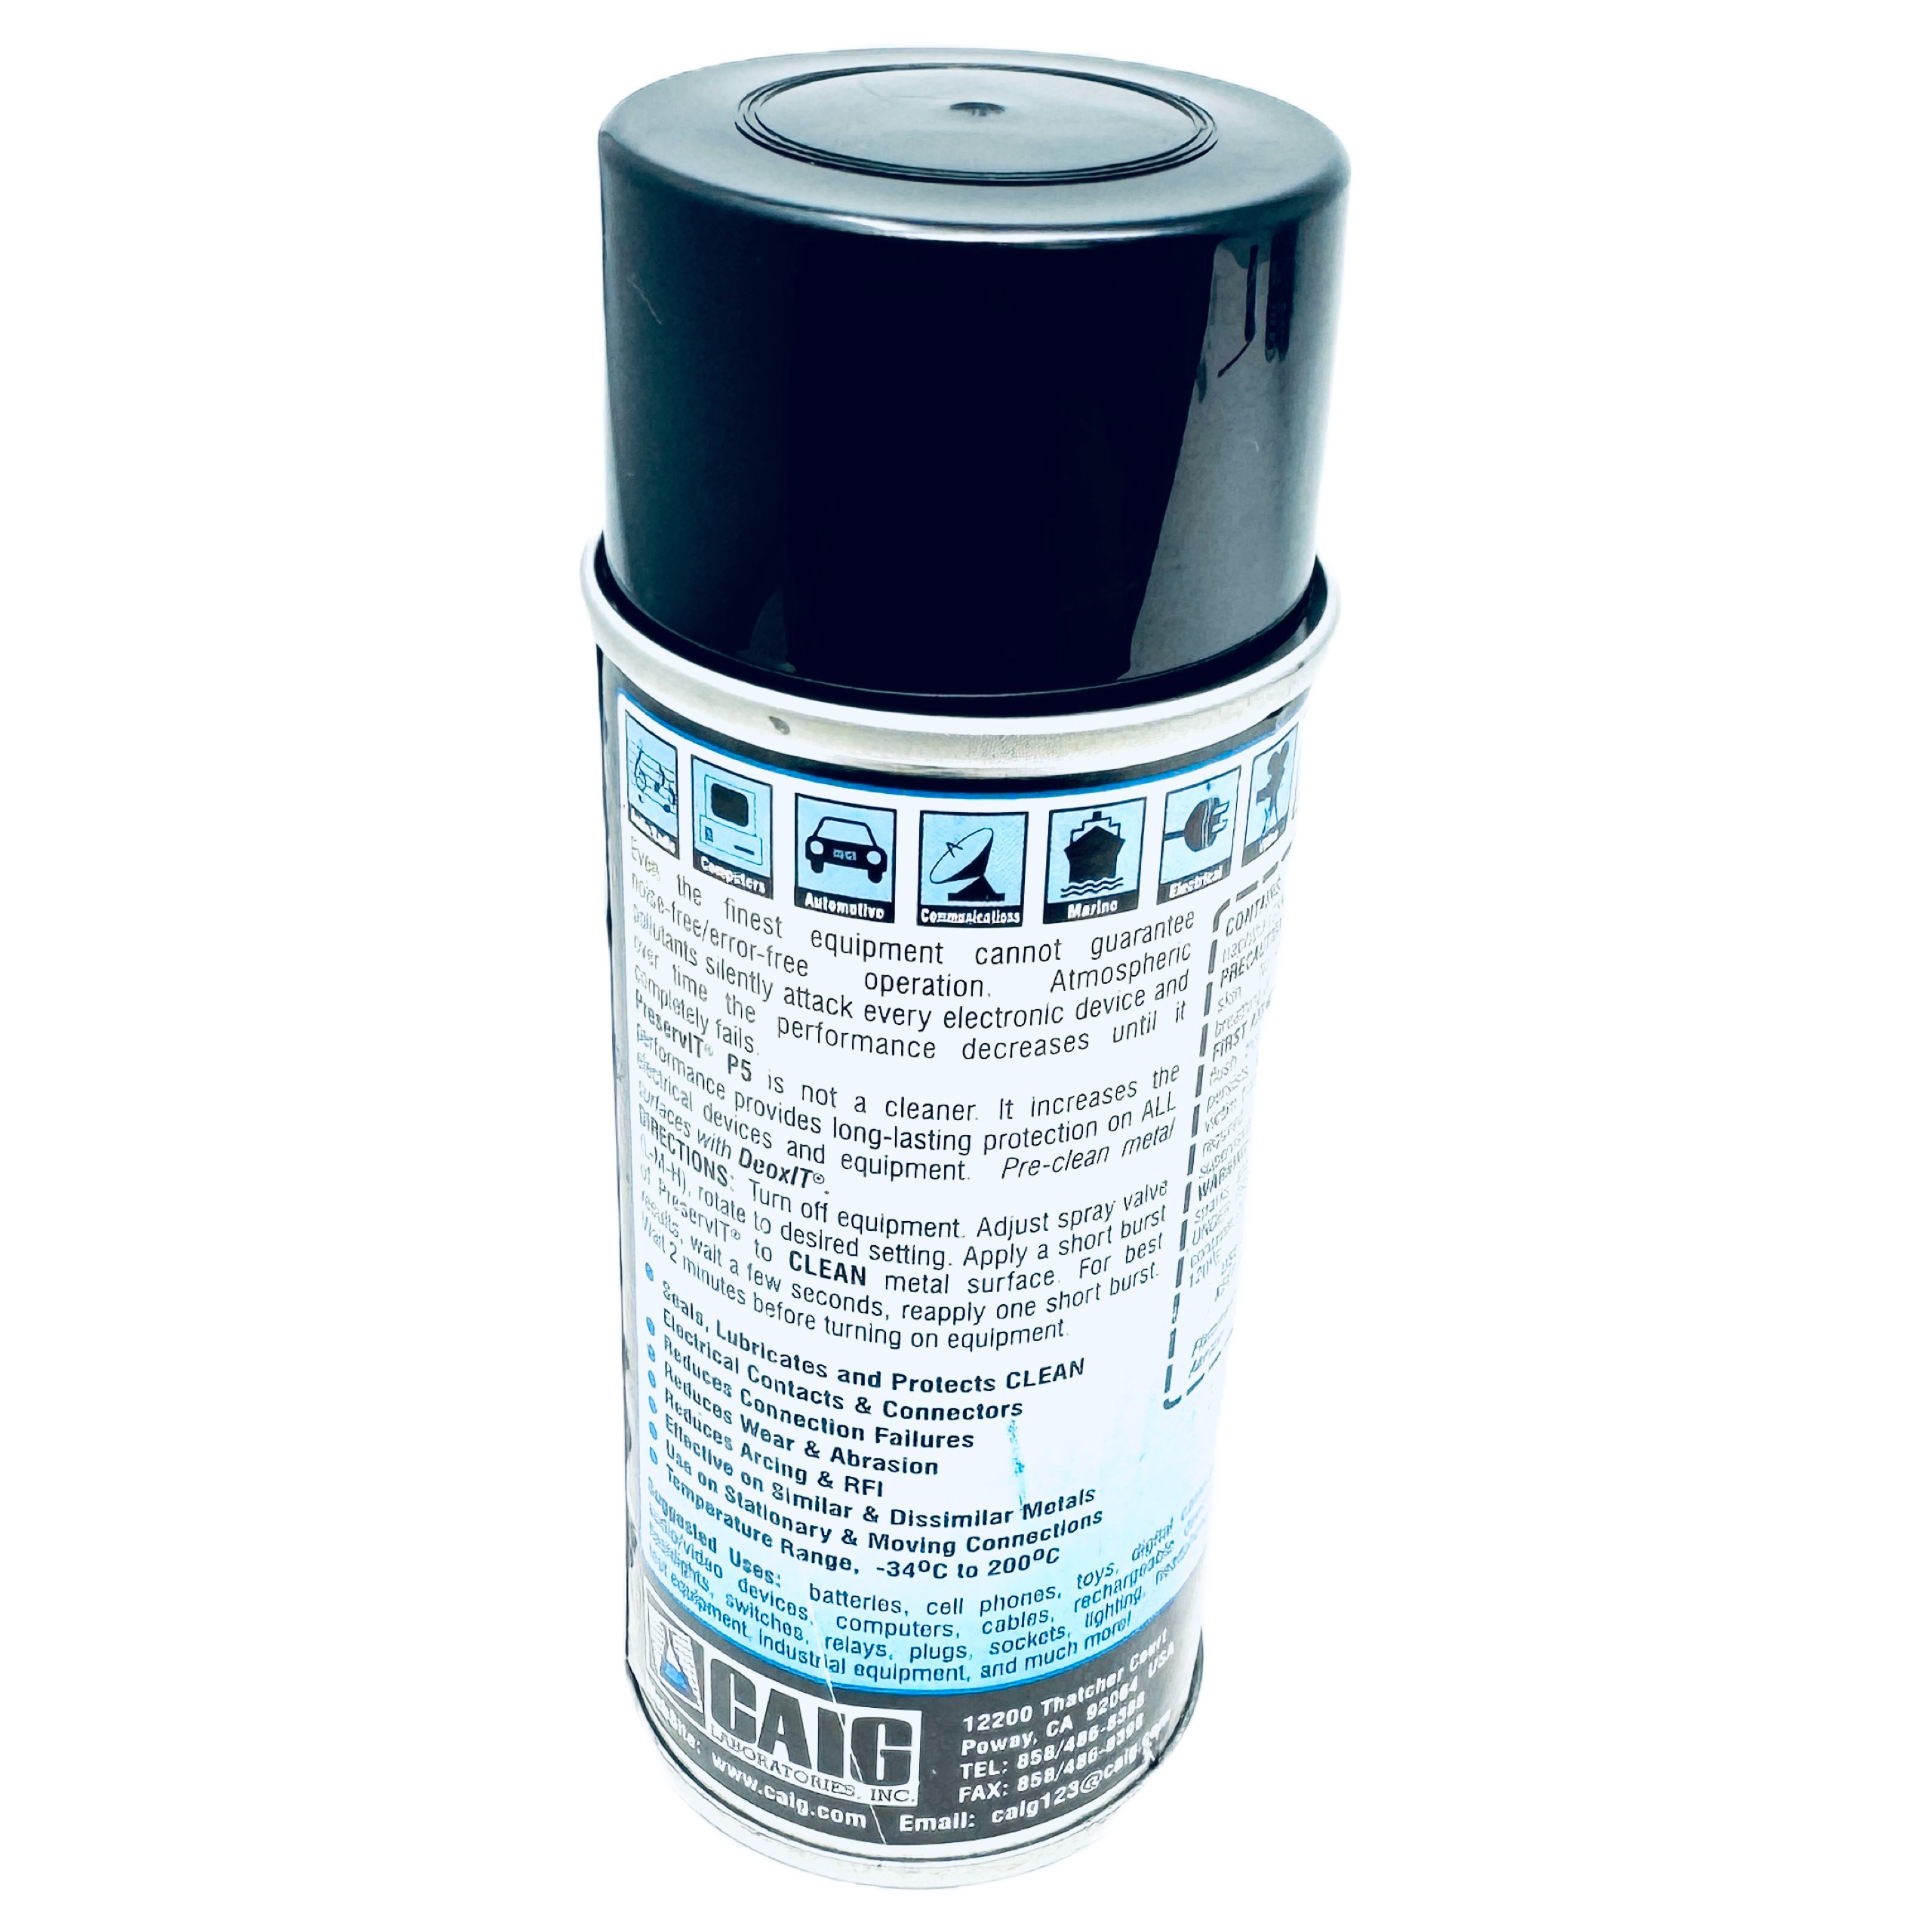 Caig CEDP5S-6 DeoxIT PreservIT Spray, contact cleaner, amp part cleaner, safe for music instruments